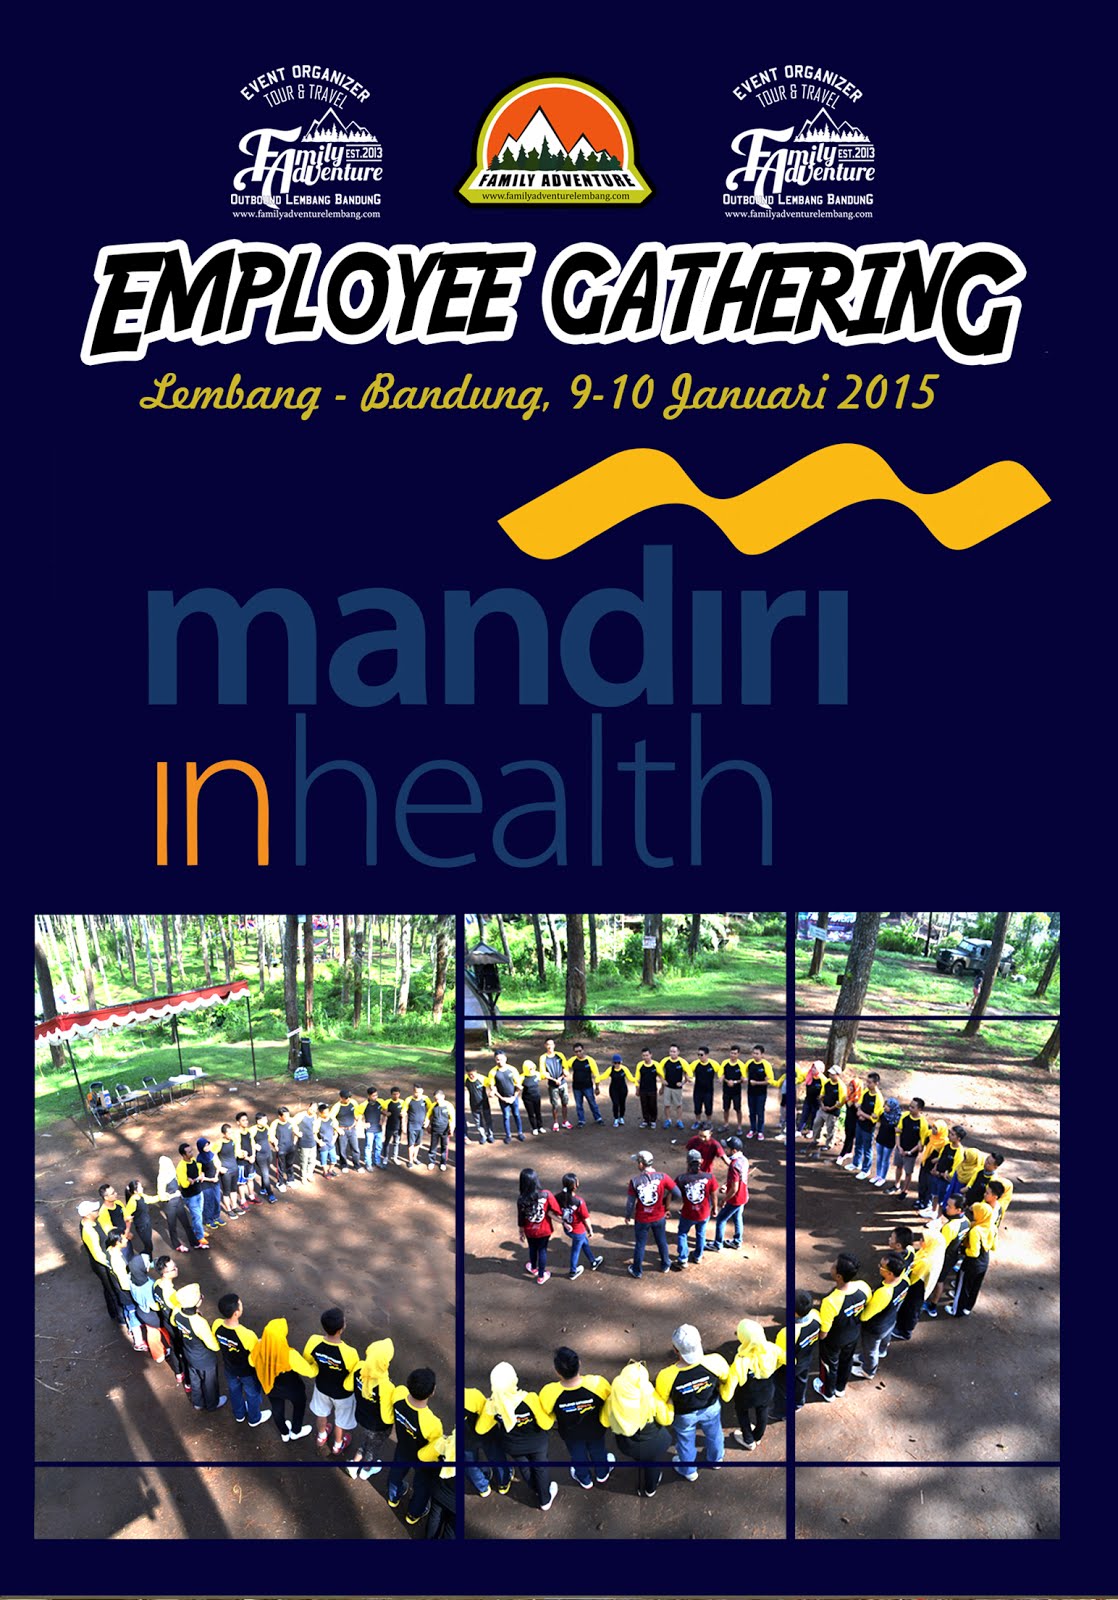 EMPLOYEE GATHERING OUTBOUND